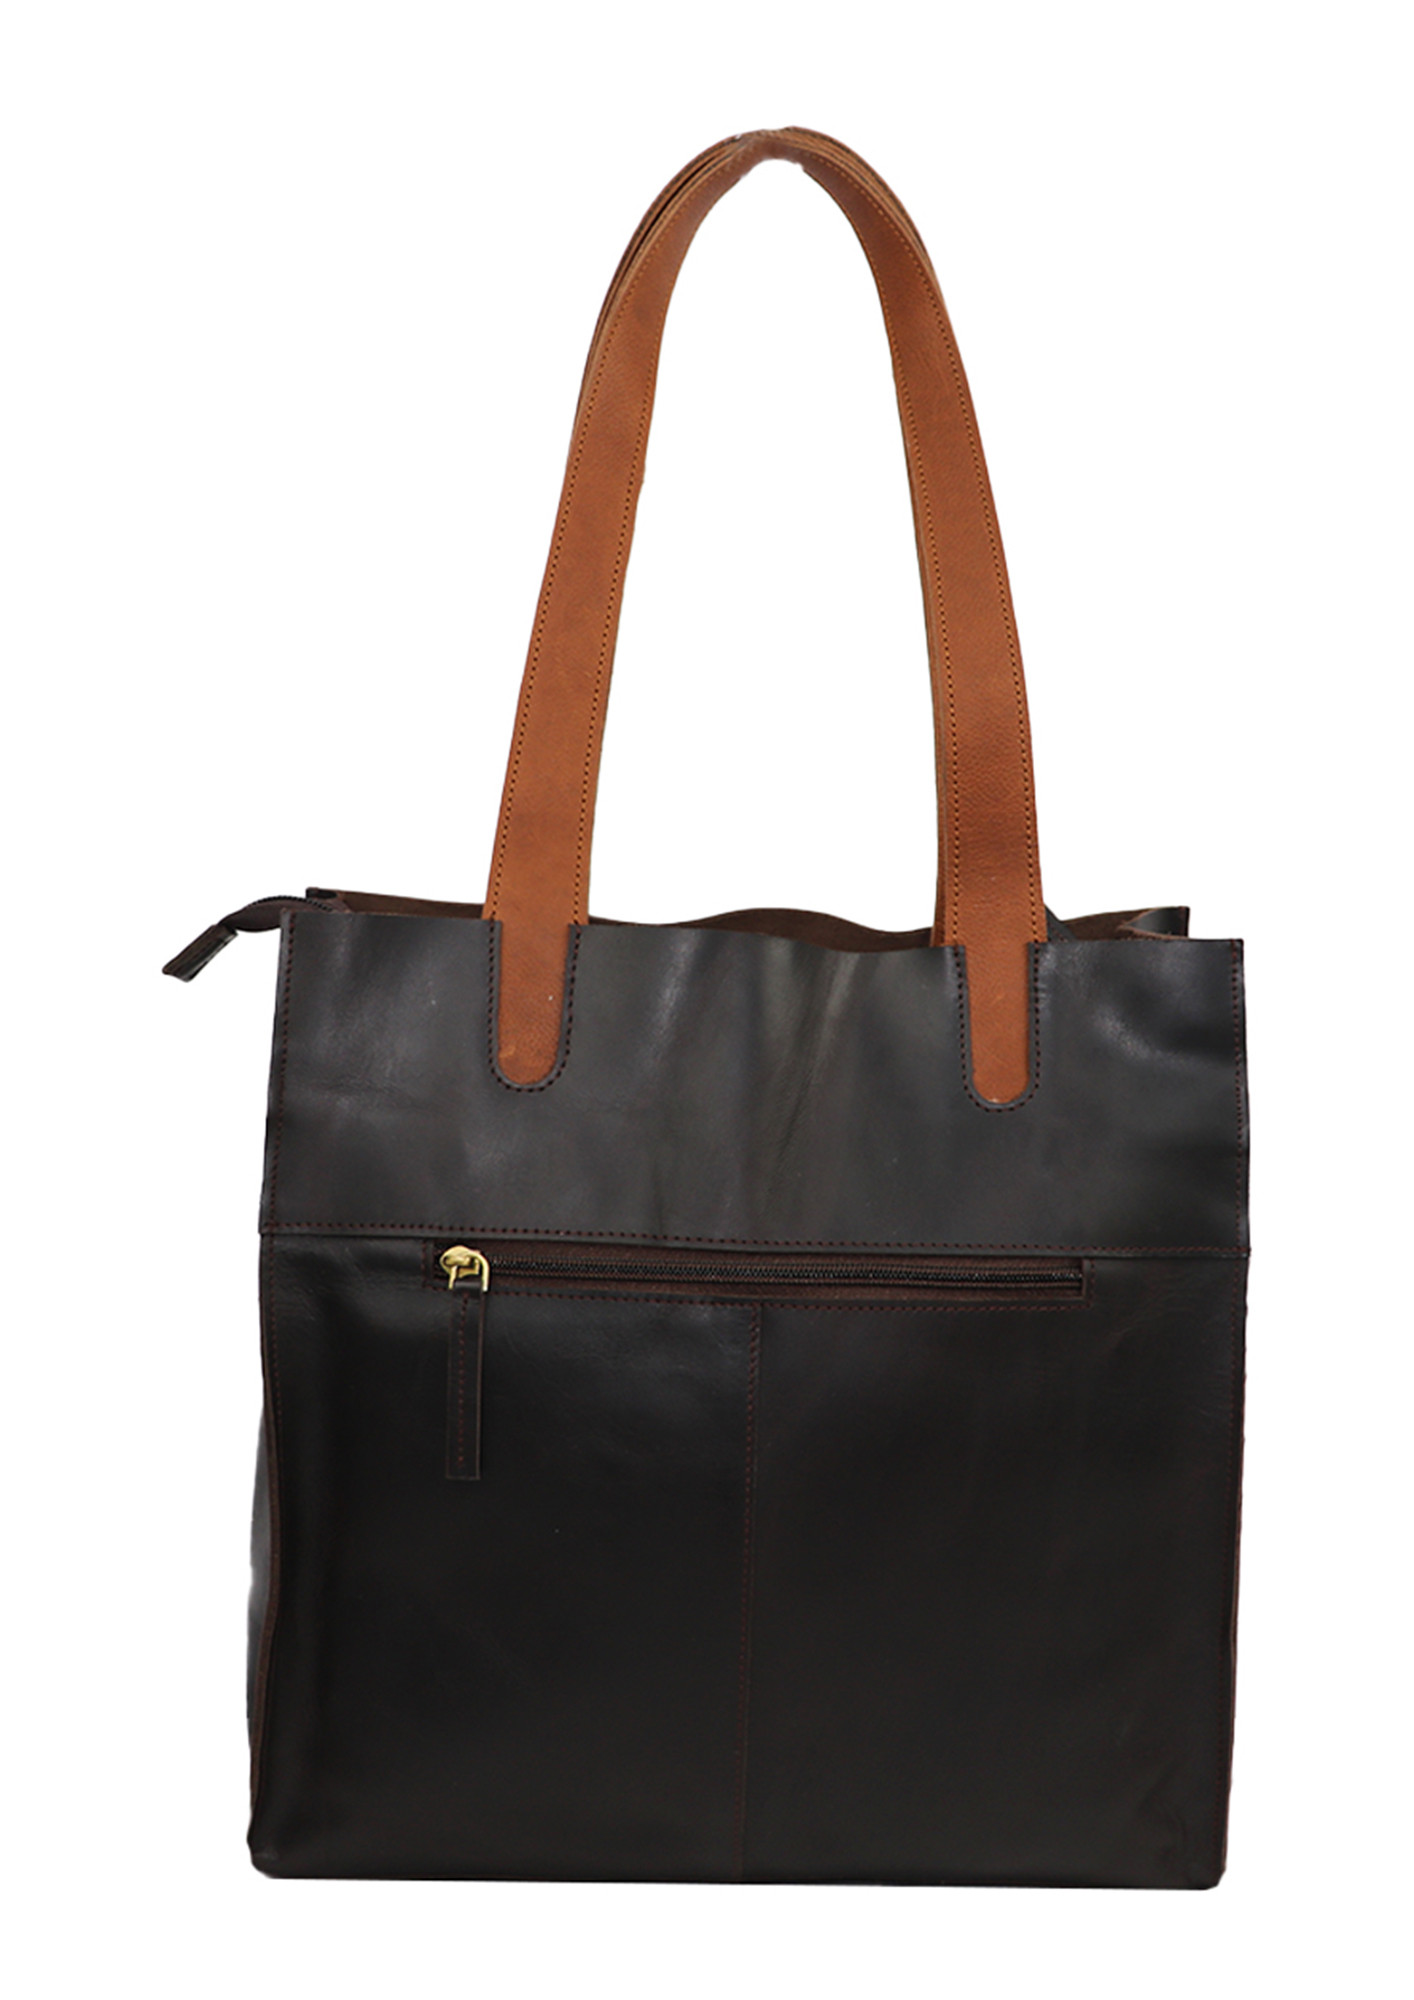 Add A Detachable Shoulder Strap To Any OpenTop Tote  Lazy Girl Designs